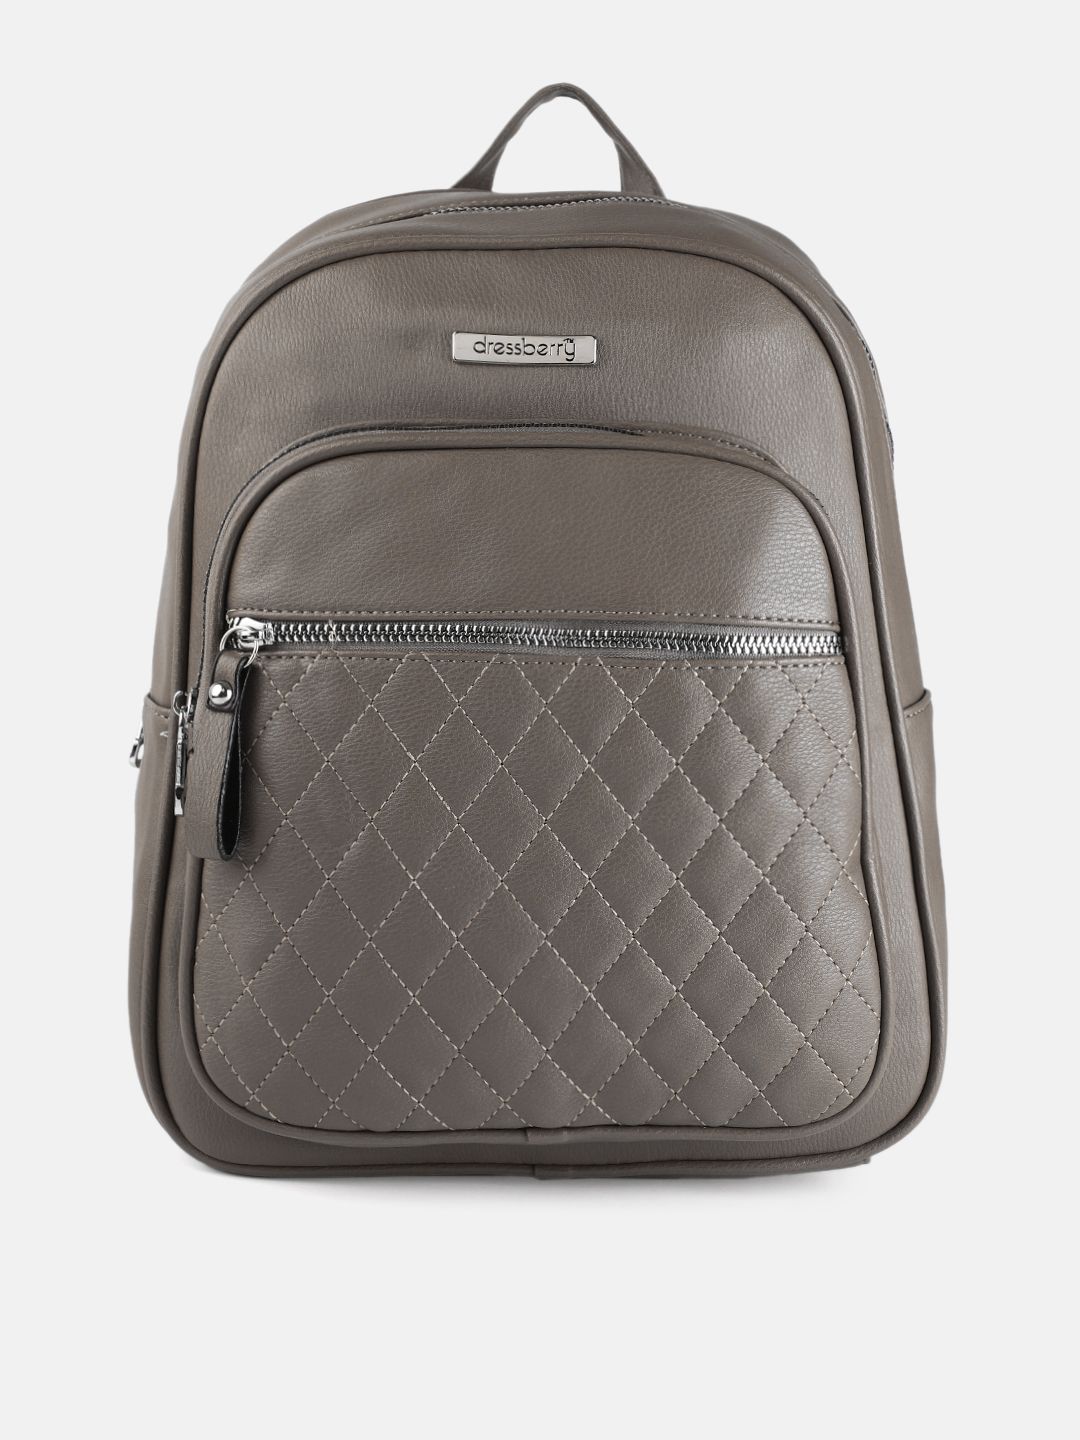 DressBerry Women Grey Solid Backpack Price in India